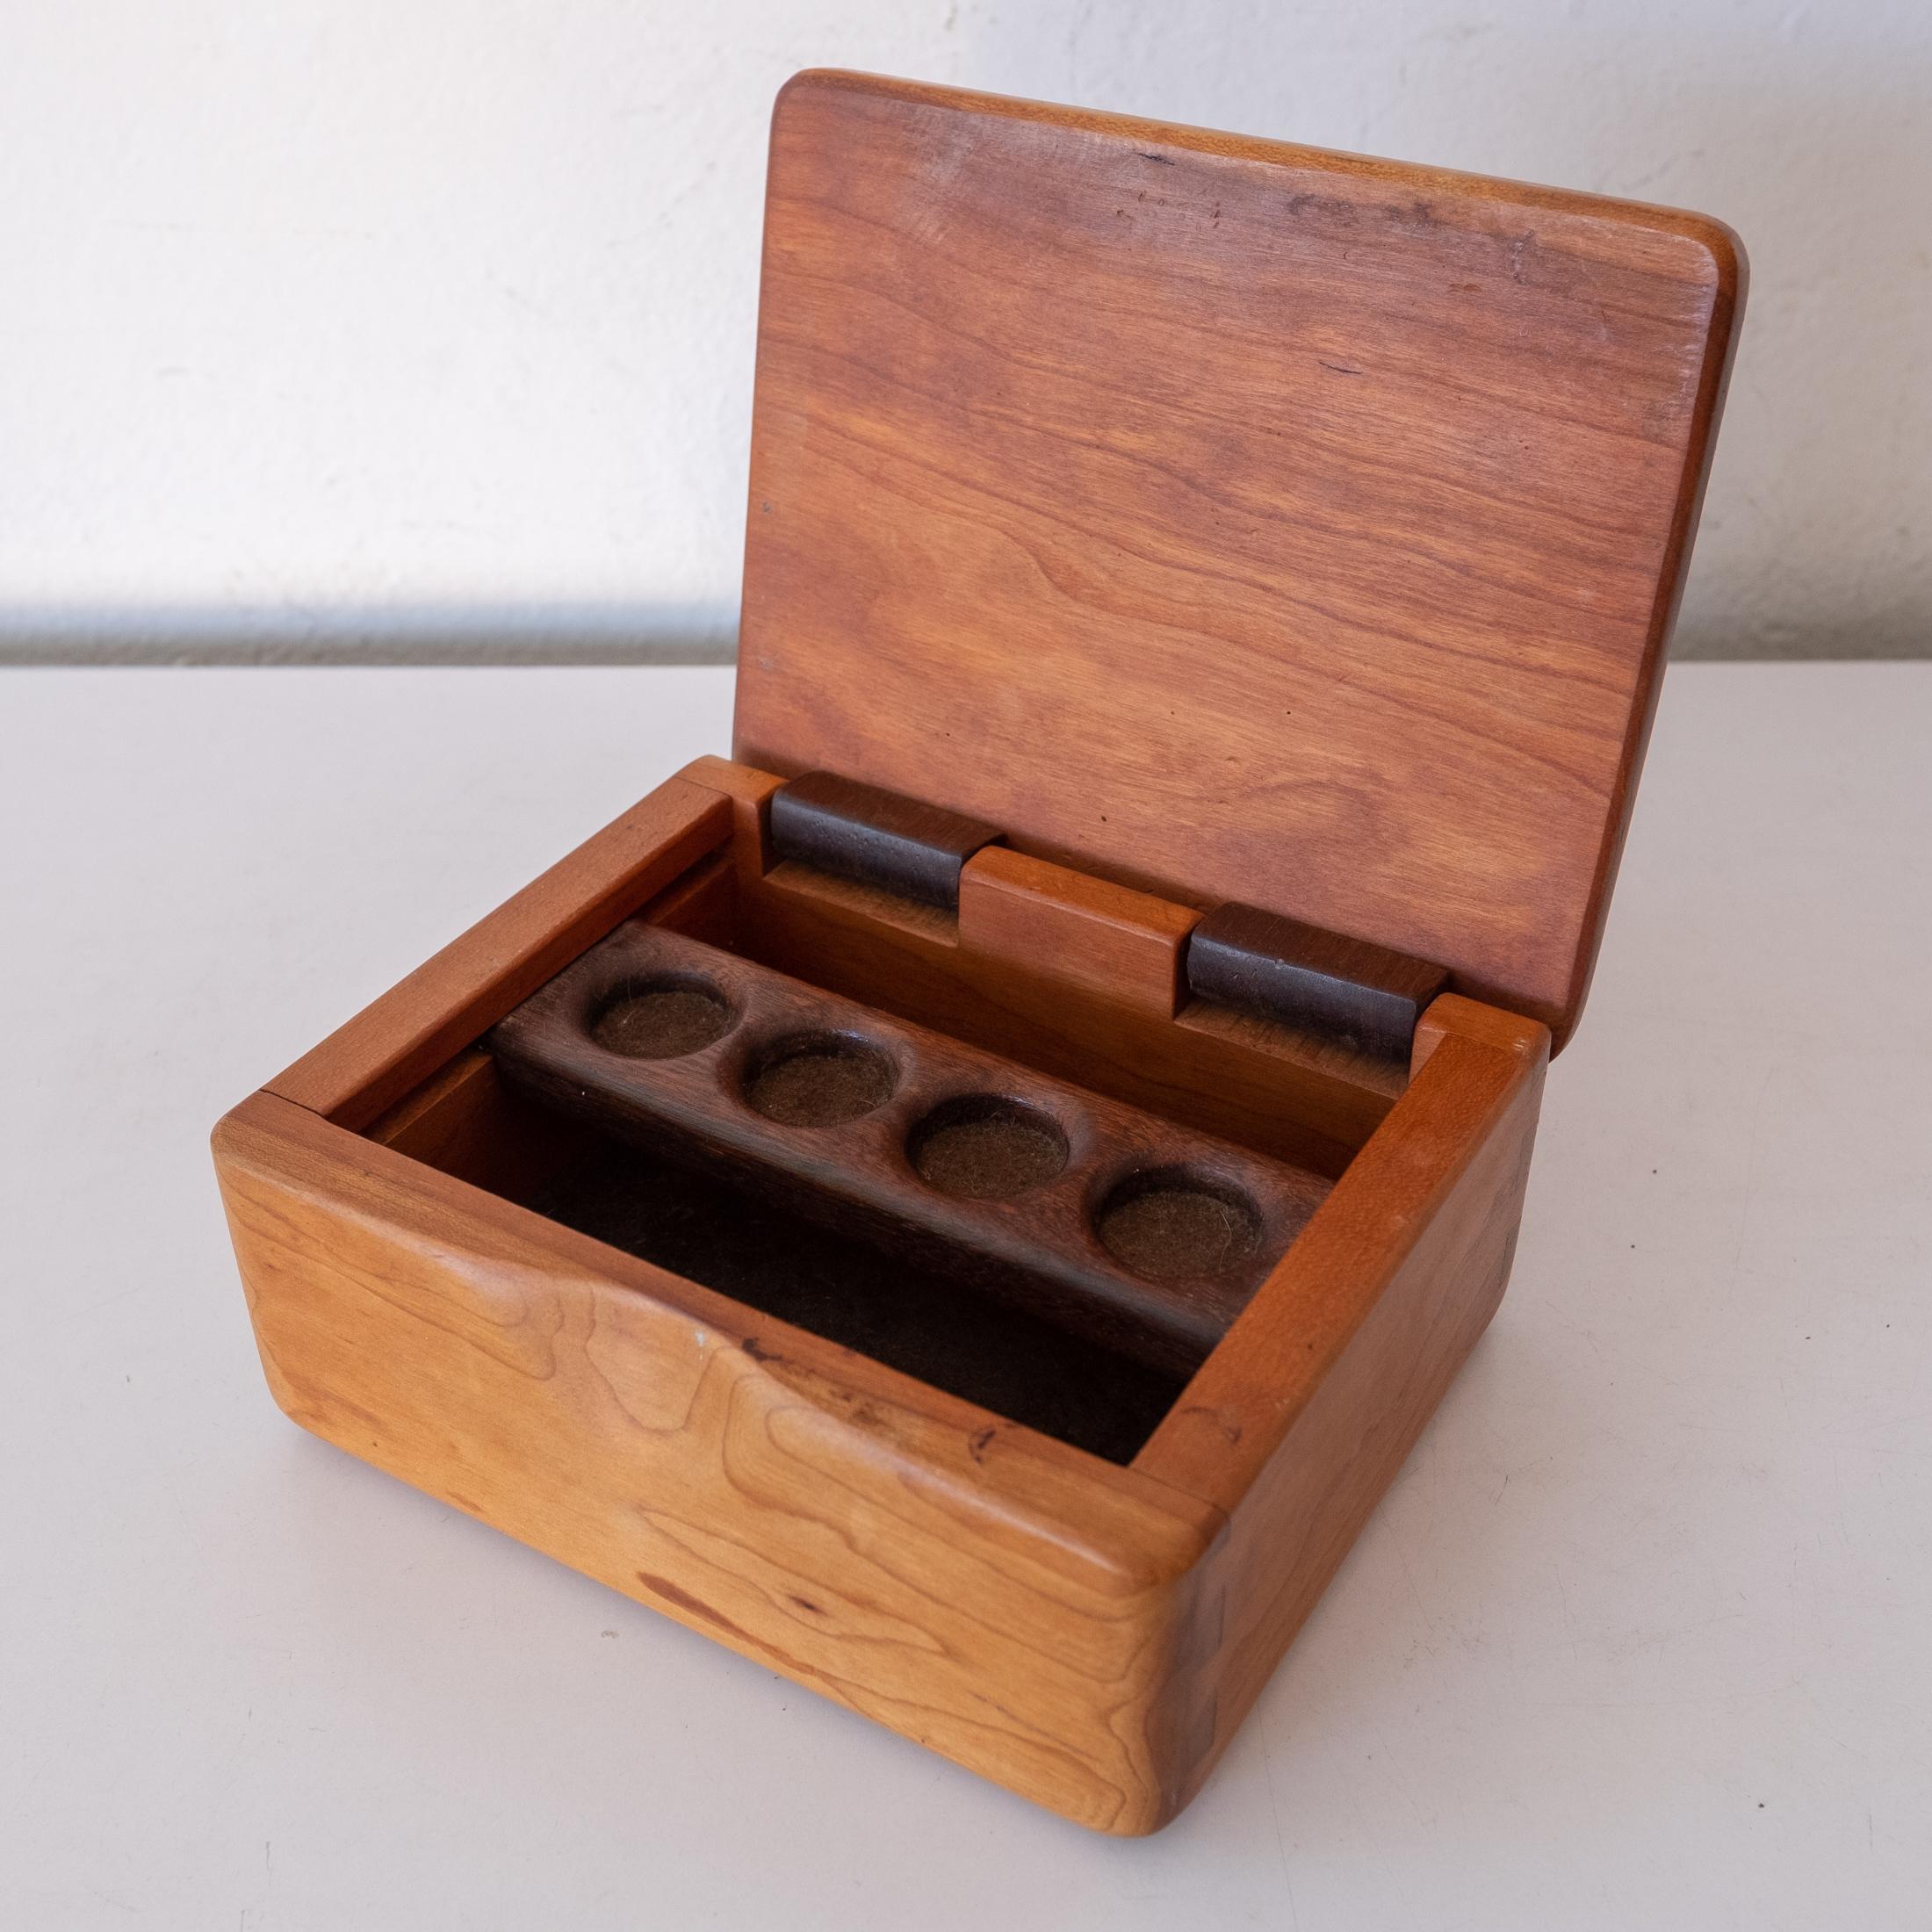 American Studio Handcrafted Wood Jewelry Box 1970s For Sale